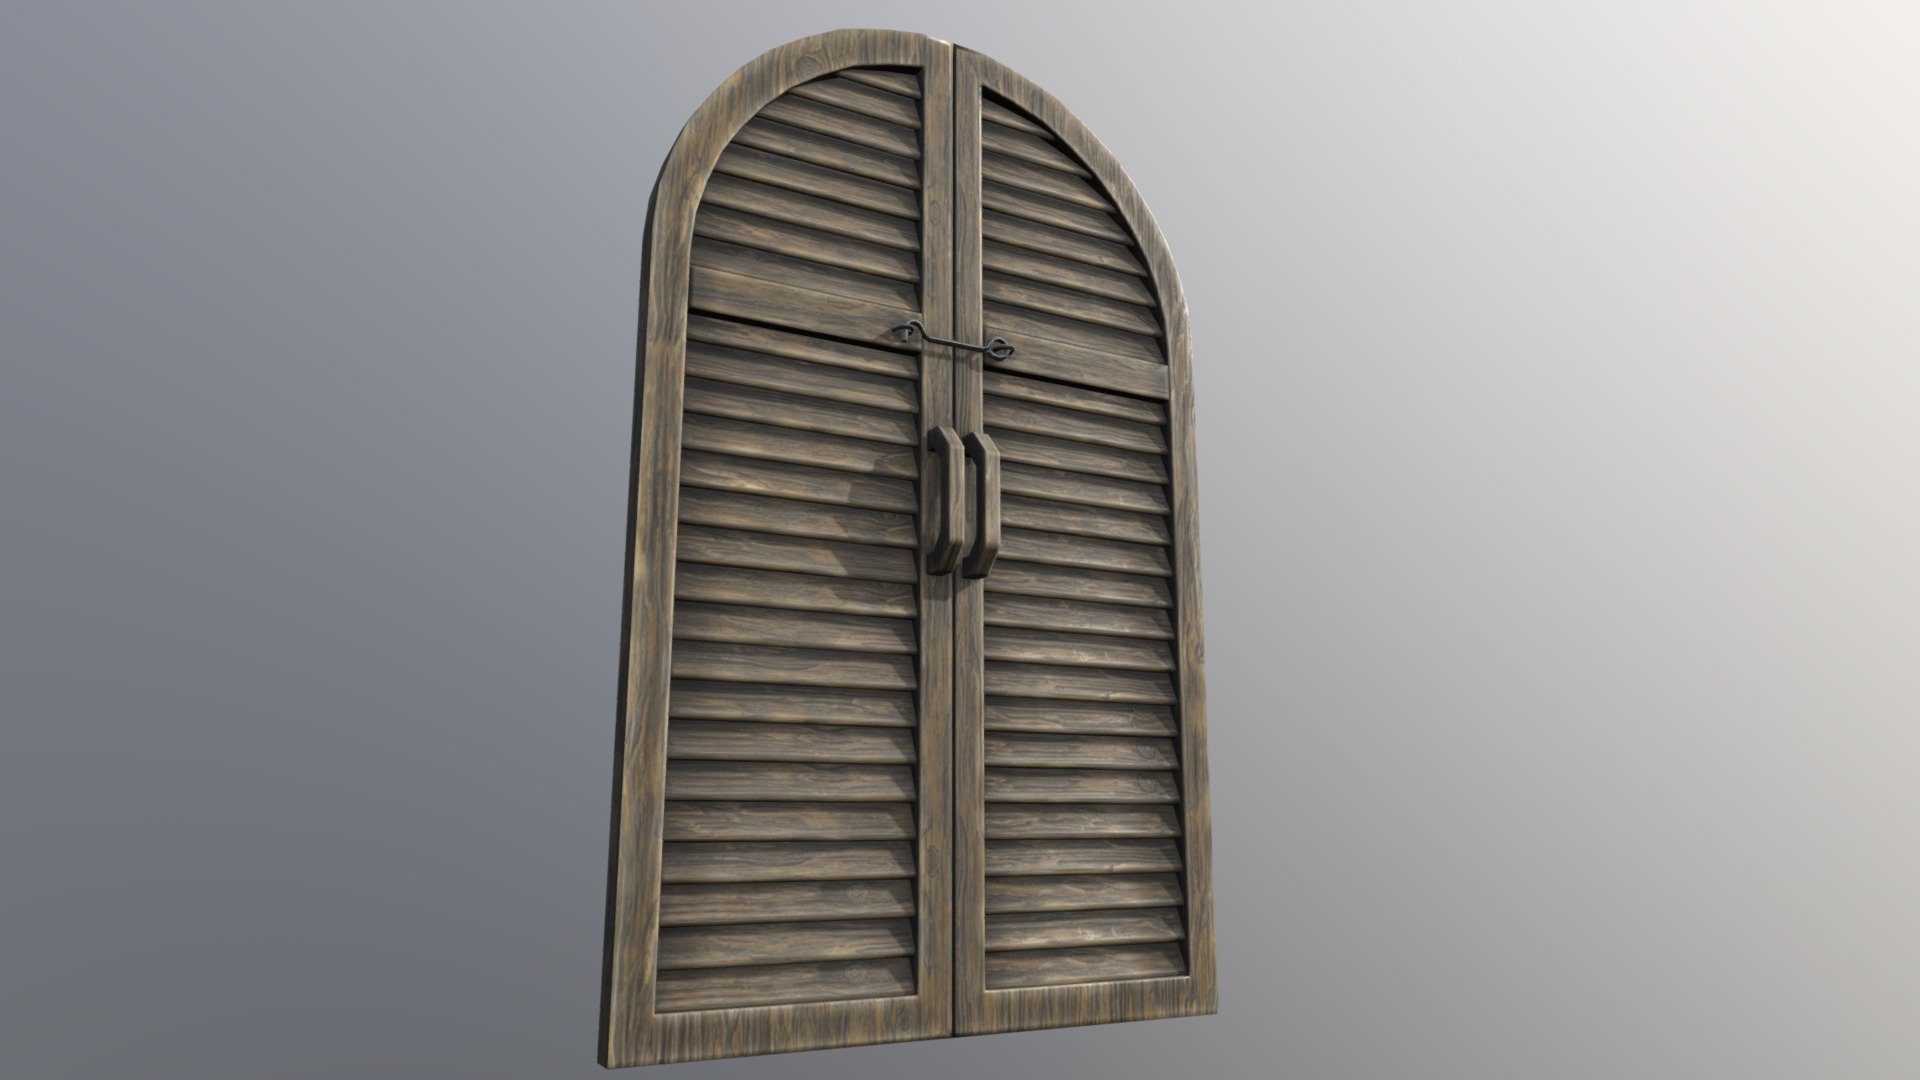 Simple window shutters, for when you just don't want that sun shining on your monitor.

Made in Blender, textured in Photoshop 3d model